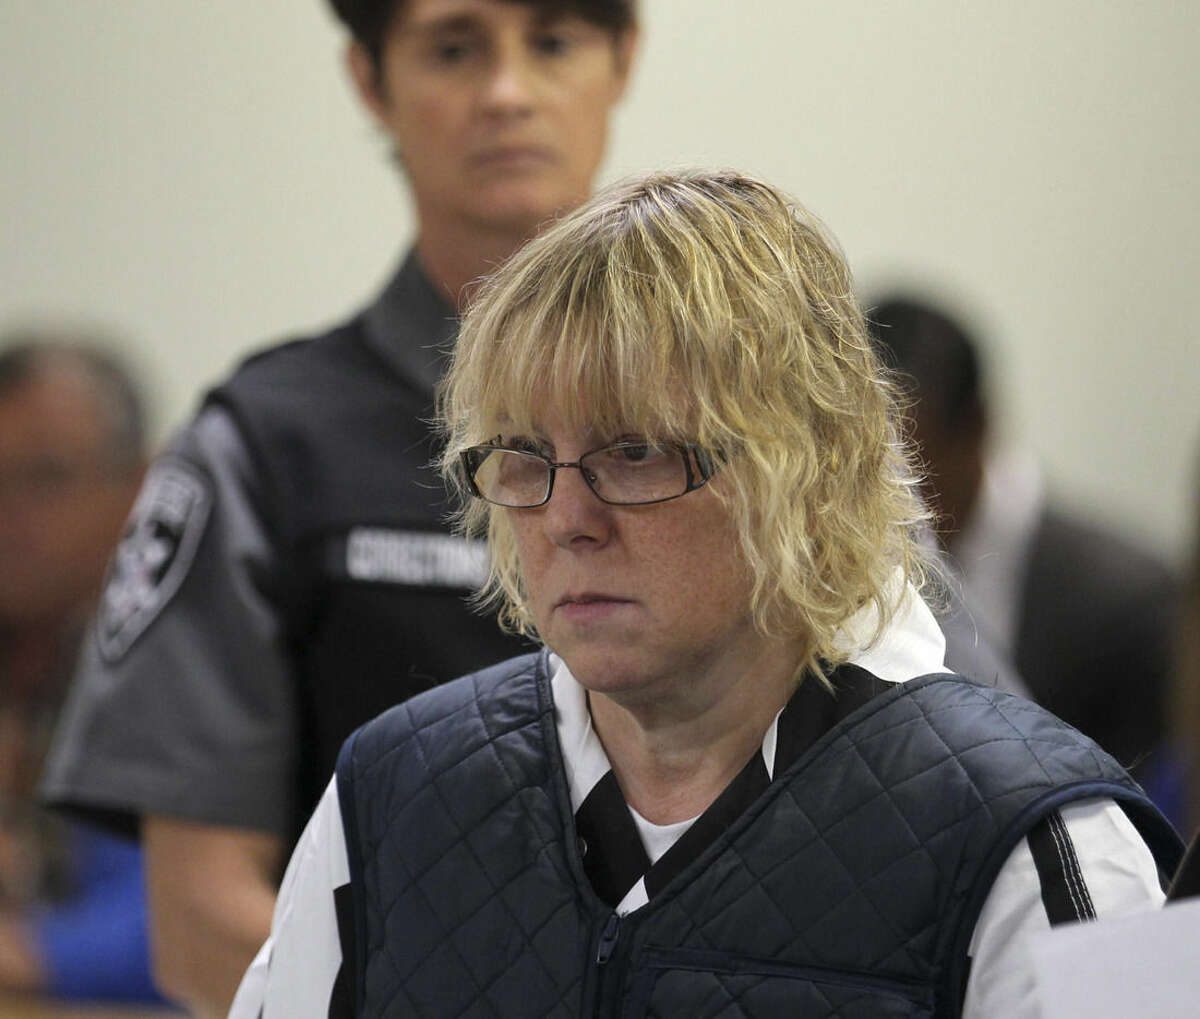 FILE - In this June 15, 2015, file photo, Joyce Mitchell appears before Judge Mark Rogers in Plattsburgh (N.Y.) City Court for a hearing. She is charged with helping Richard Matt and David Sweat escape from the Clinton Correctional Facility on June 6. While Richard Matt and David Sweat counted their final hours to freedom, prison tailor-shop instructor Mitchell was heading to a hospital with chest pains driven by a panic attack. She was leaving the hospital when she learned that Matt and Sweat were on the loose and that state police were looking for her and her husband, Lyle, a fellow industrial instructor at the prison. (G.N. Miller/NY Post via AP, Pool, File)